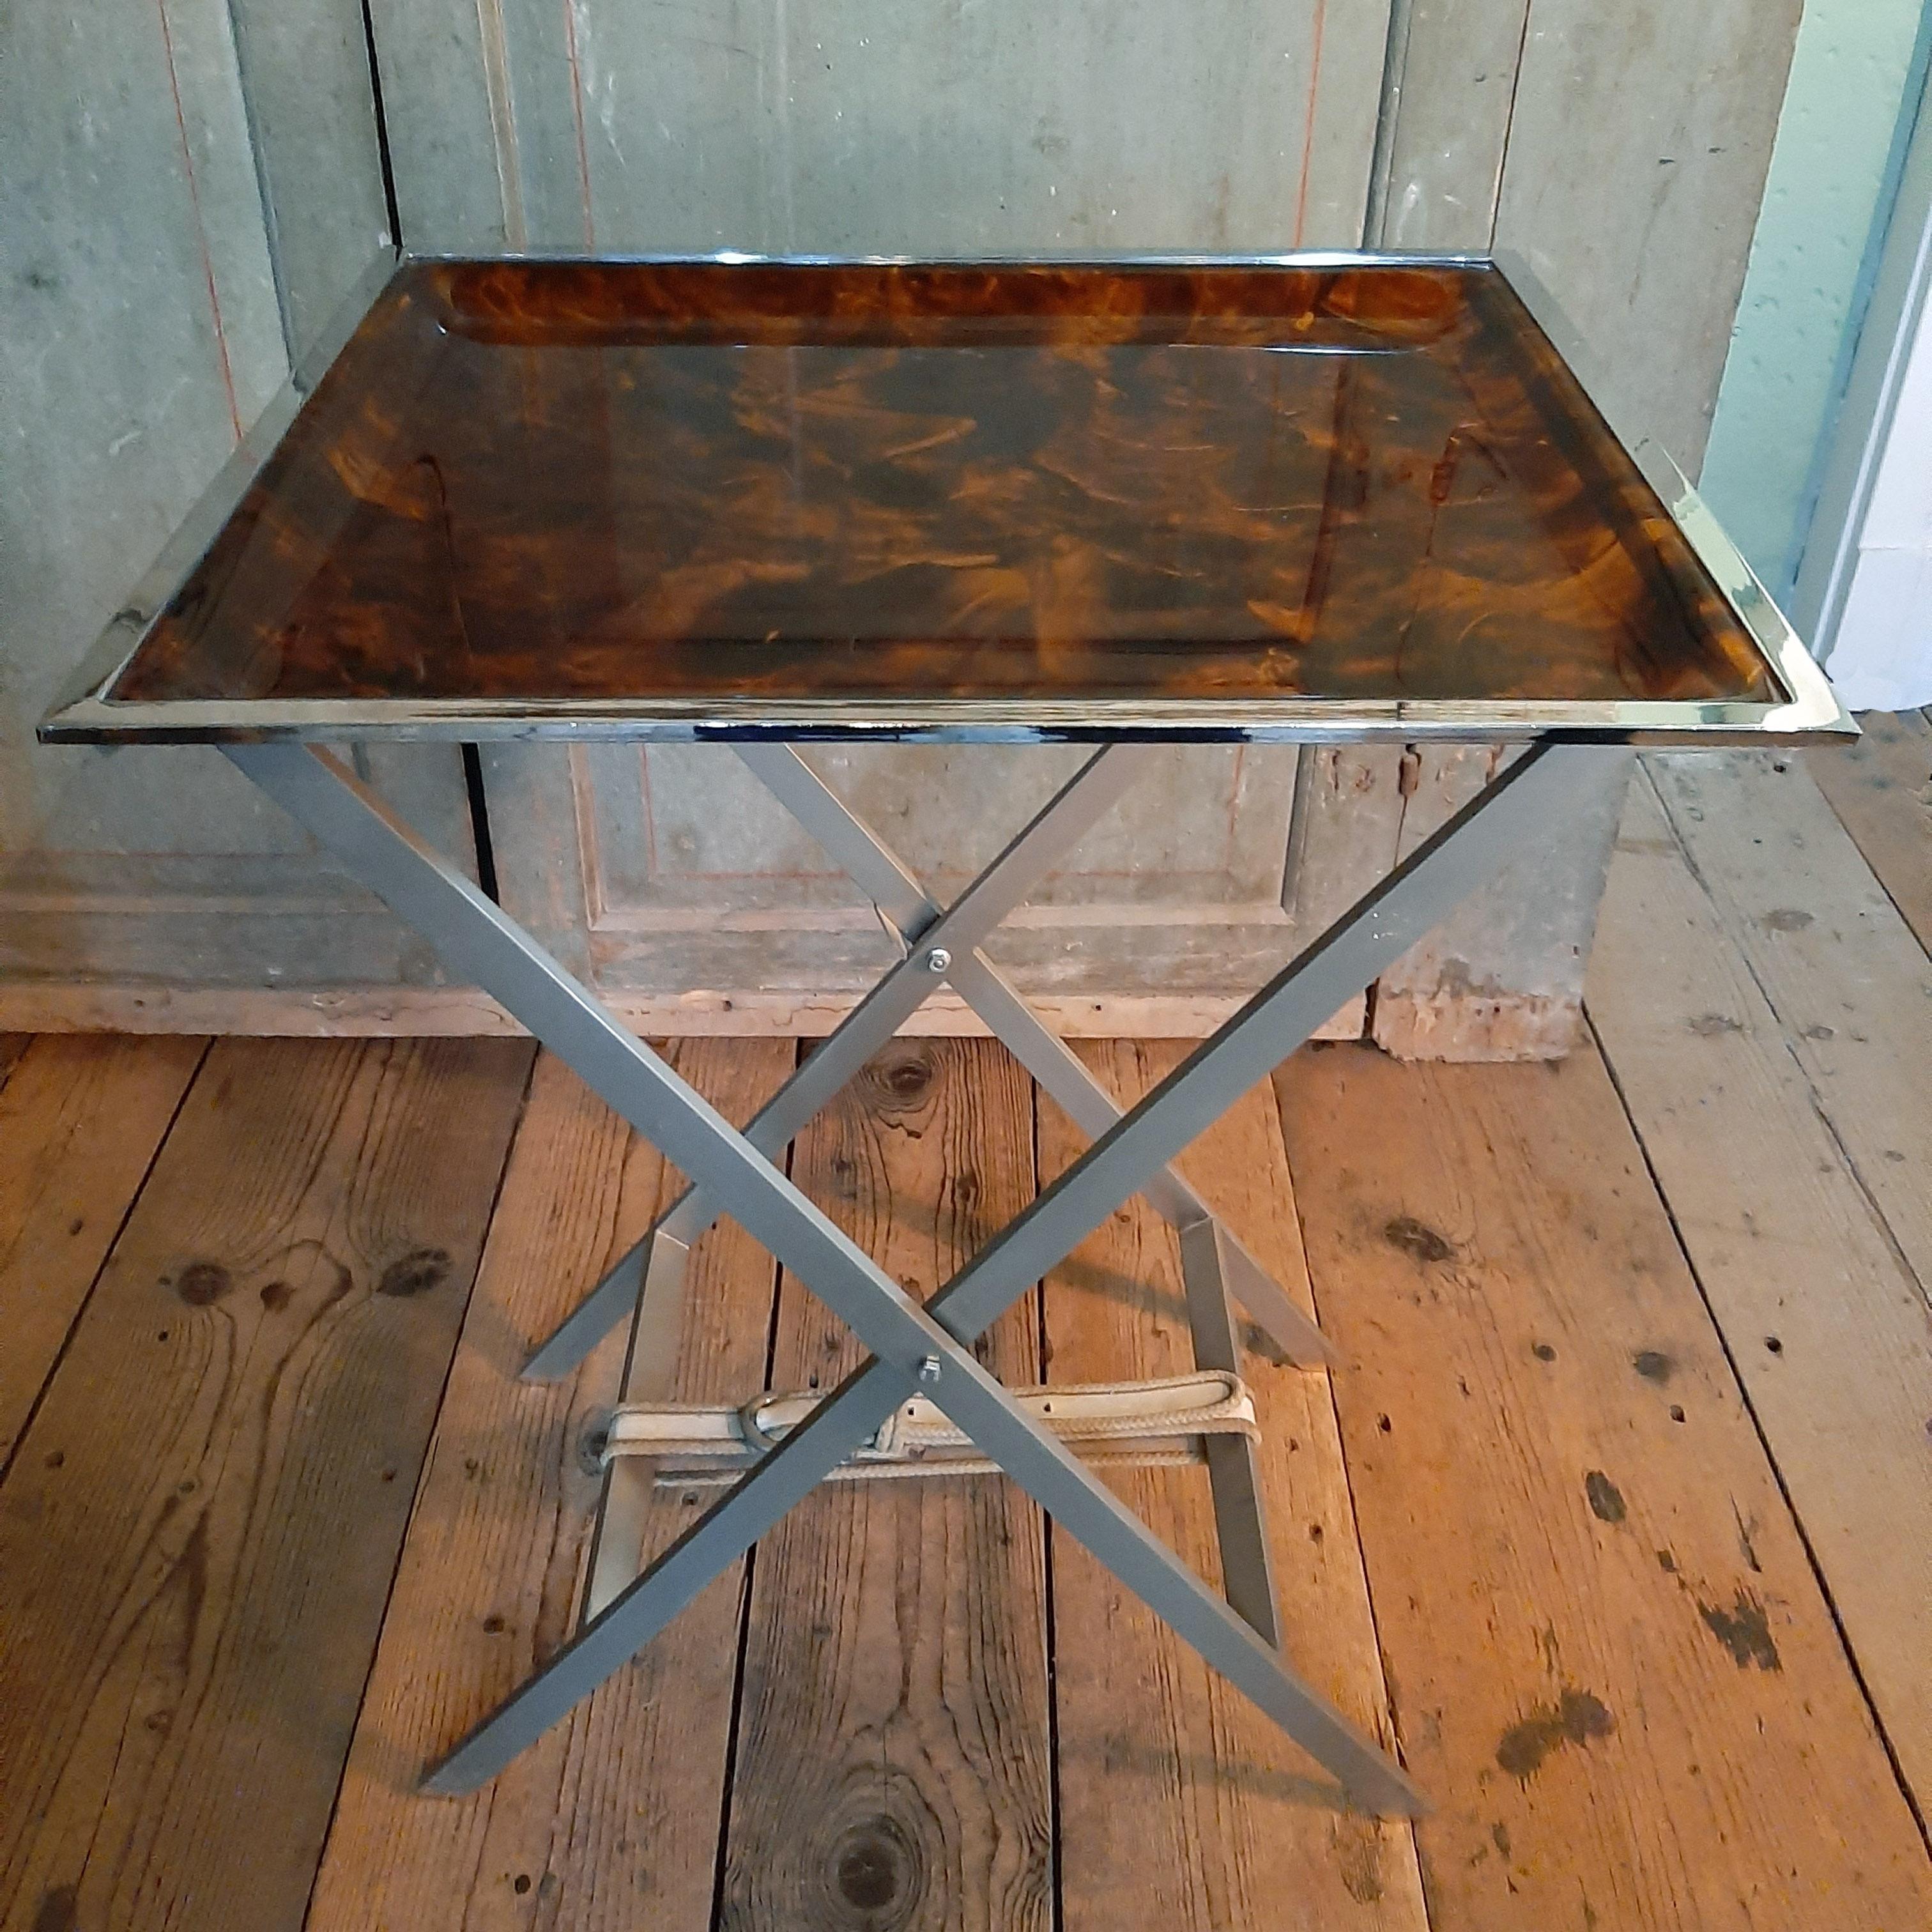 Beautiful midcentury tortoiseshell tray table produced in Italy during the 1970s. The design for this Italian piece of serveware is attributed to Willy Rizzo.

The Faux tortoiseshell and lucite serving tray can be used as a side table because of its